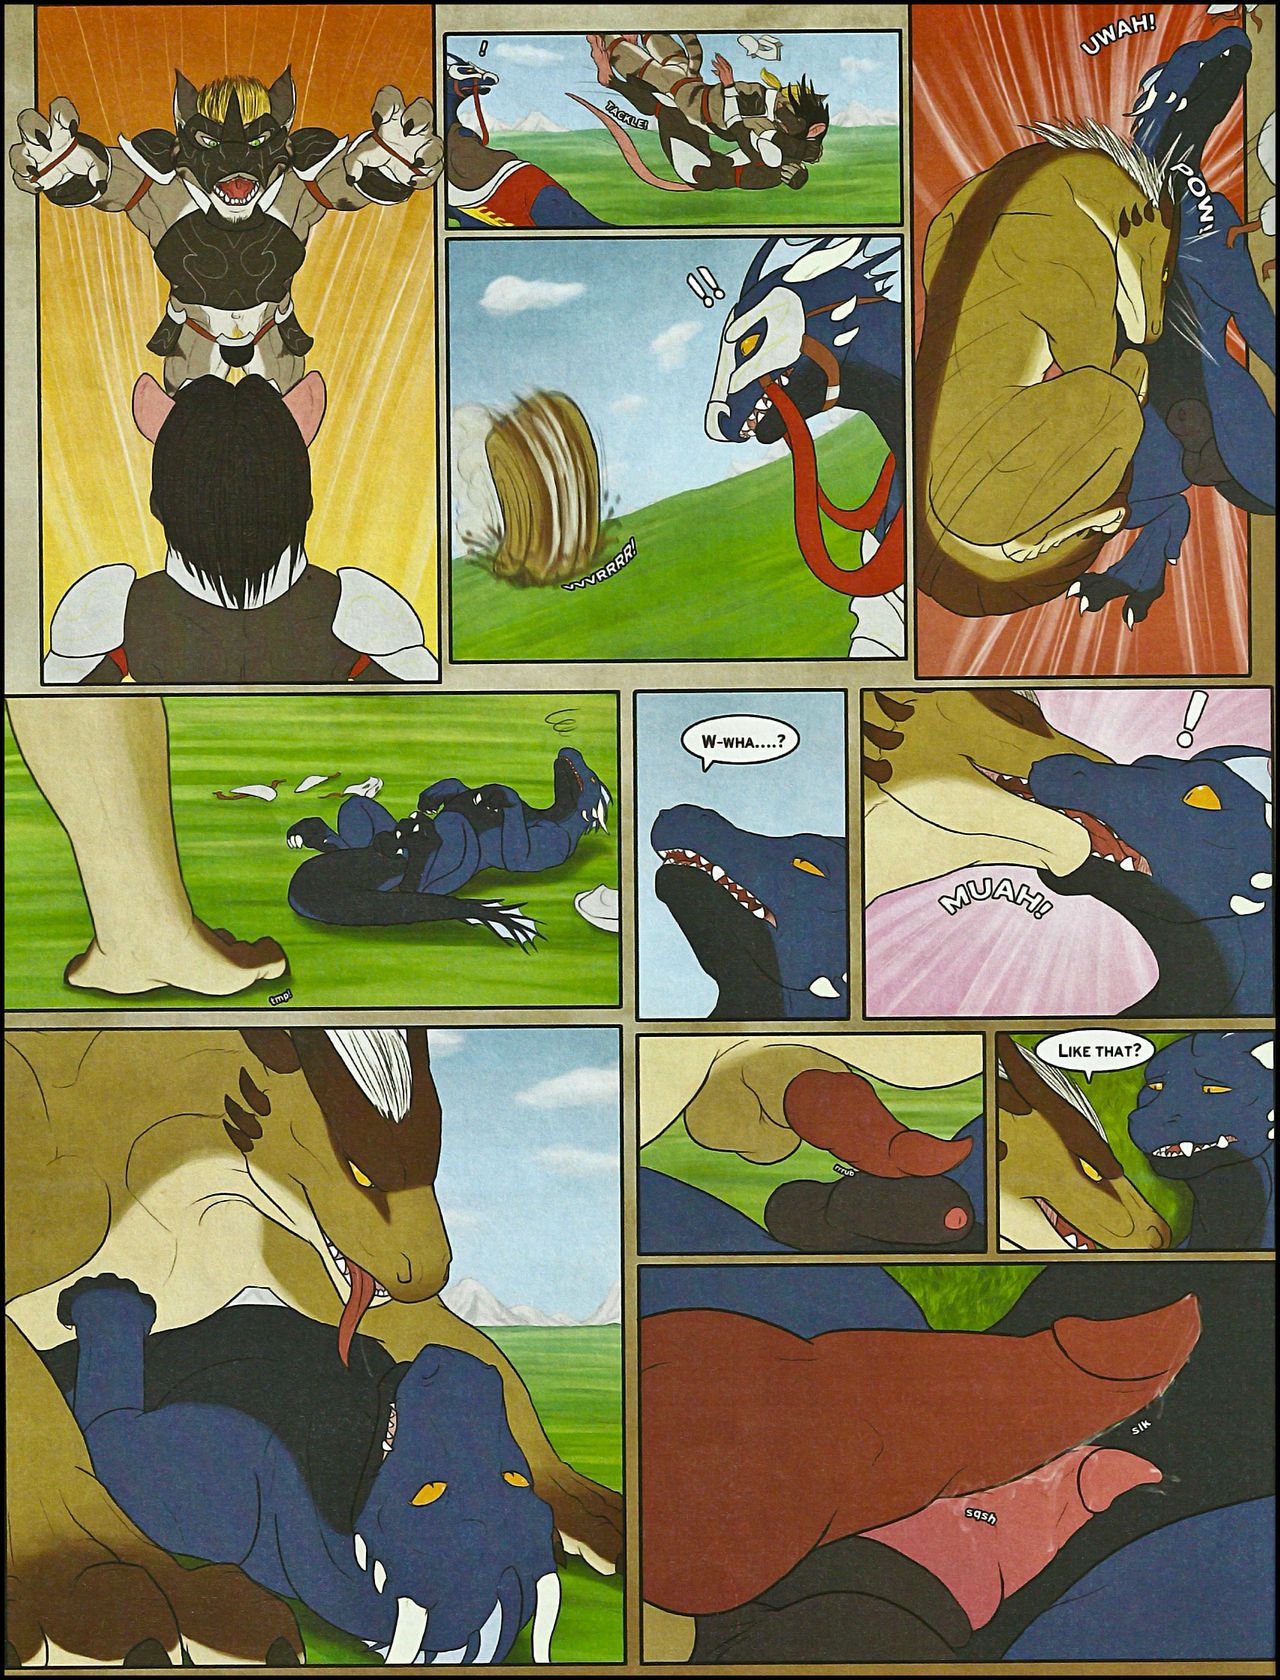 Dragon\'s Hoard Volume 2 (Composition of different artists) - part 3